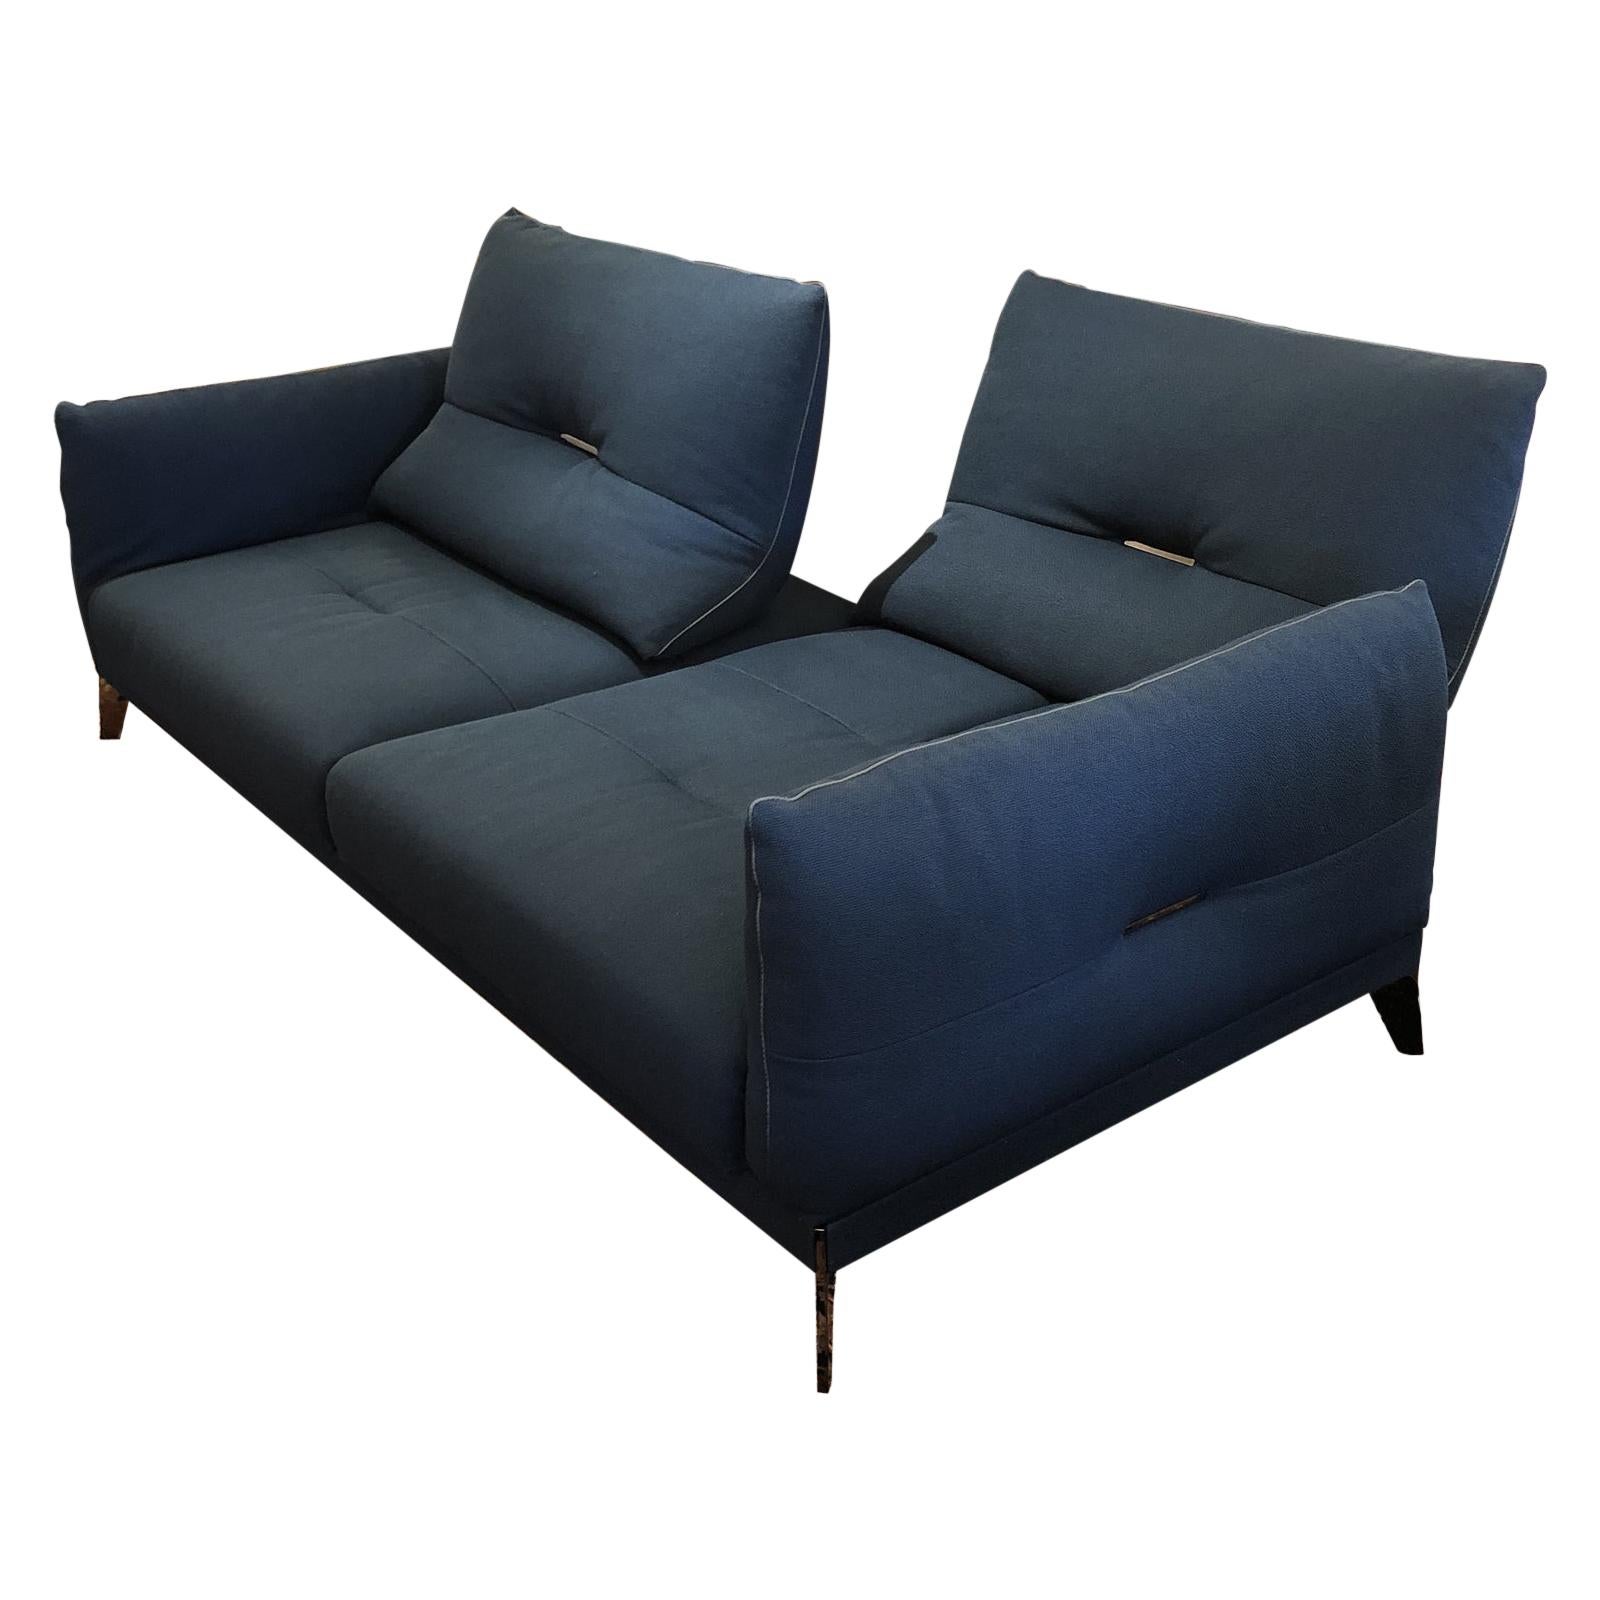 Itineraire Sofa by Roche Bobois For Sale at 1stDibs | roche bobois  itineraire sofa, itineraire roche bobois, roche bobois itineraire price